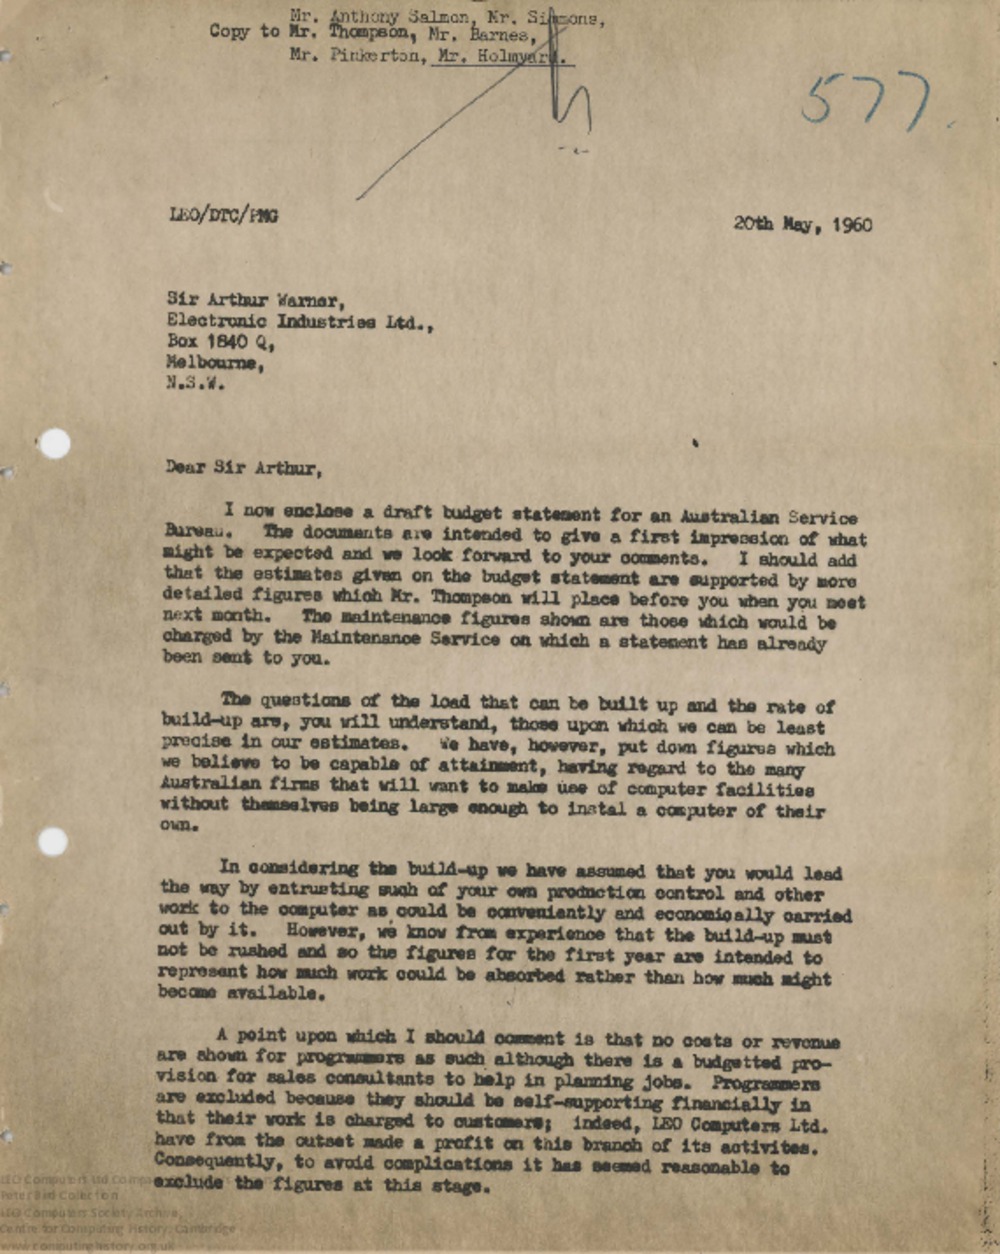 Article: 62843 Draft Budget Statement for an Australian Computer Service Bureau, 20th May 1960 